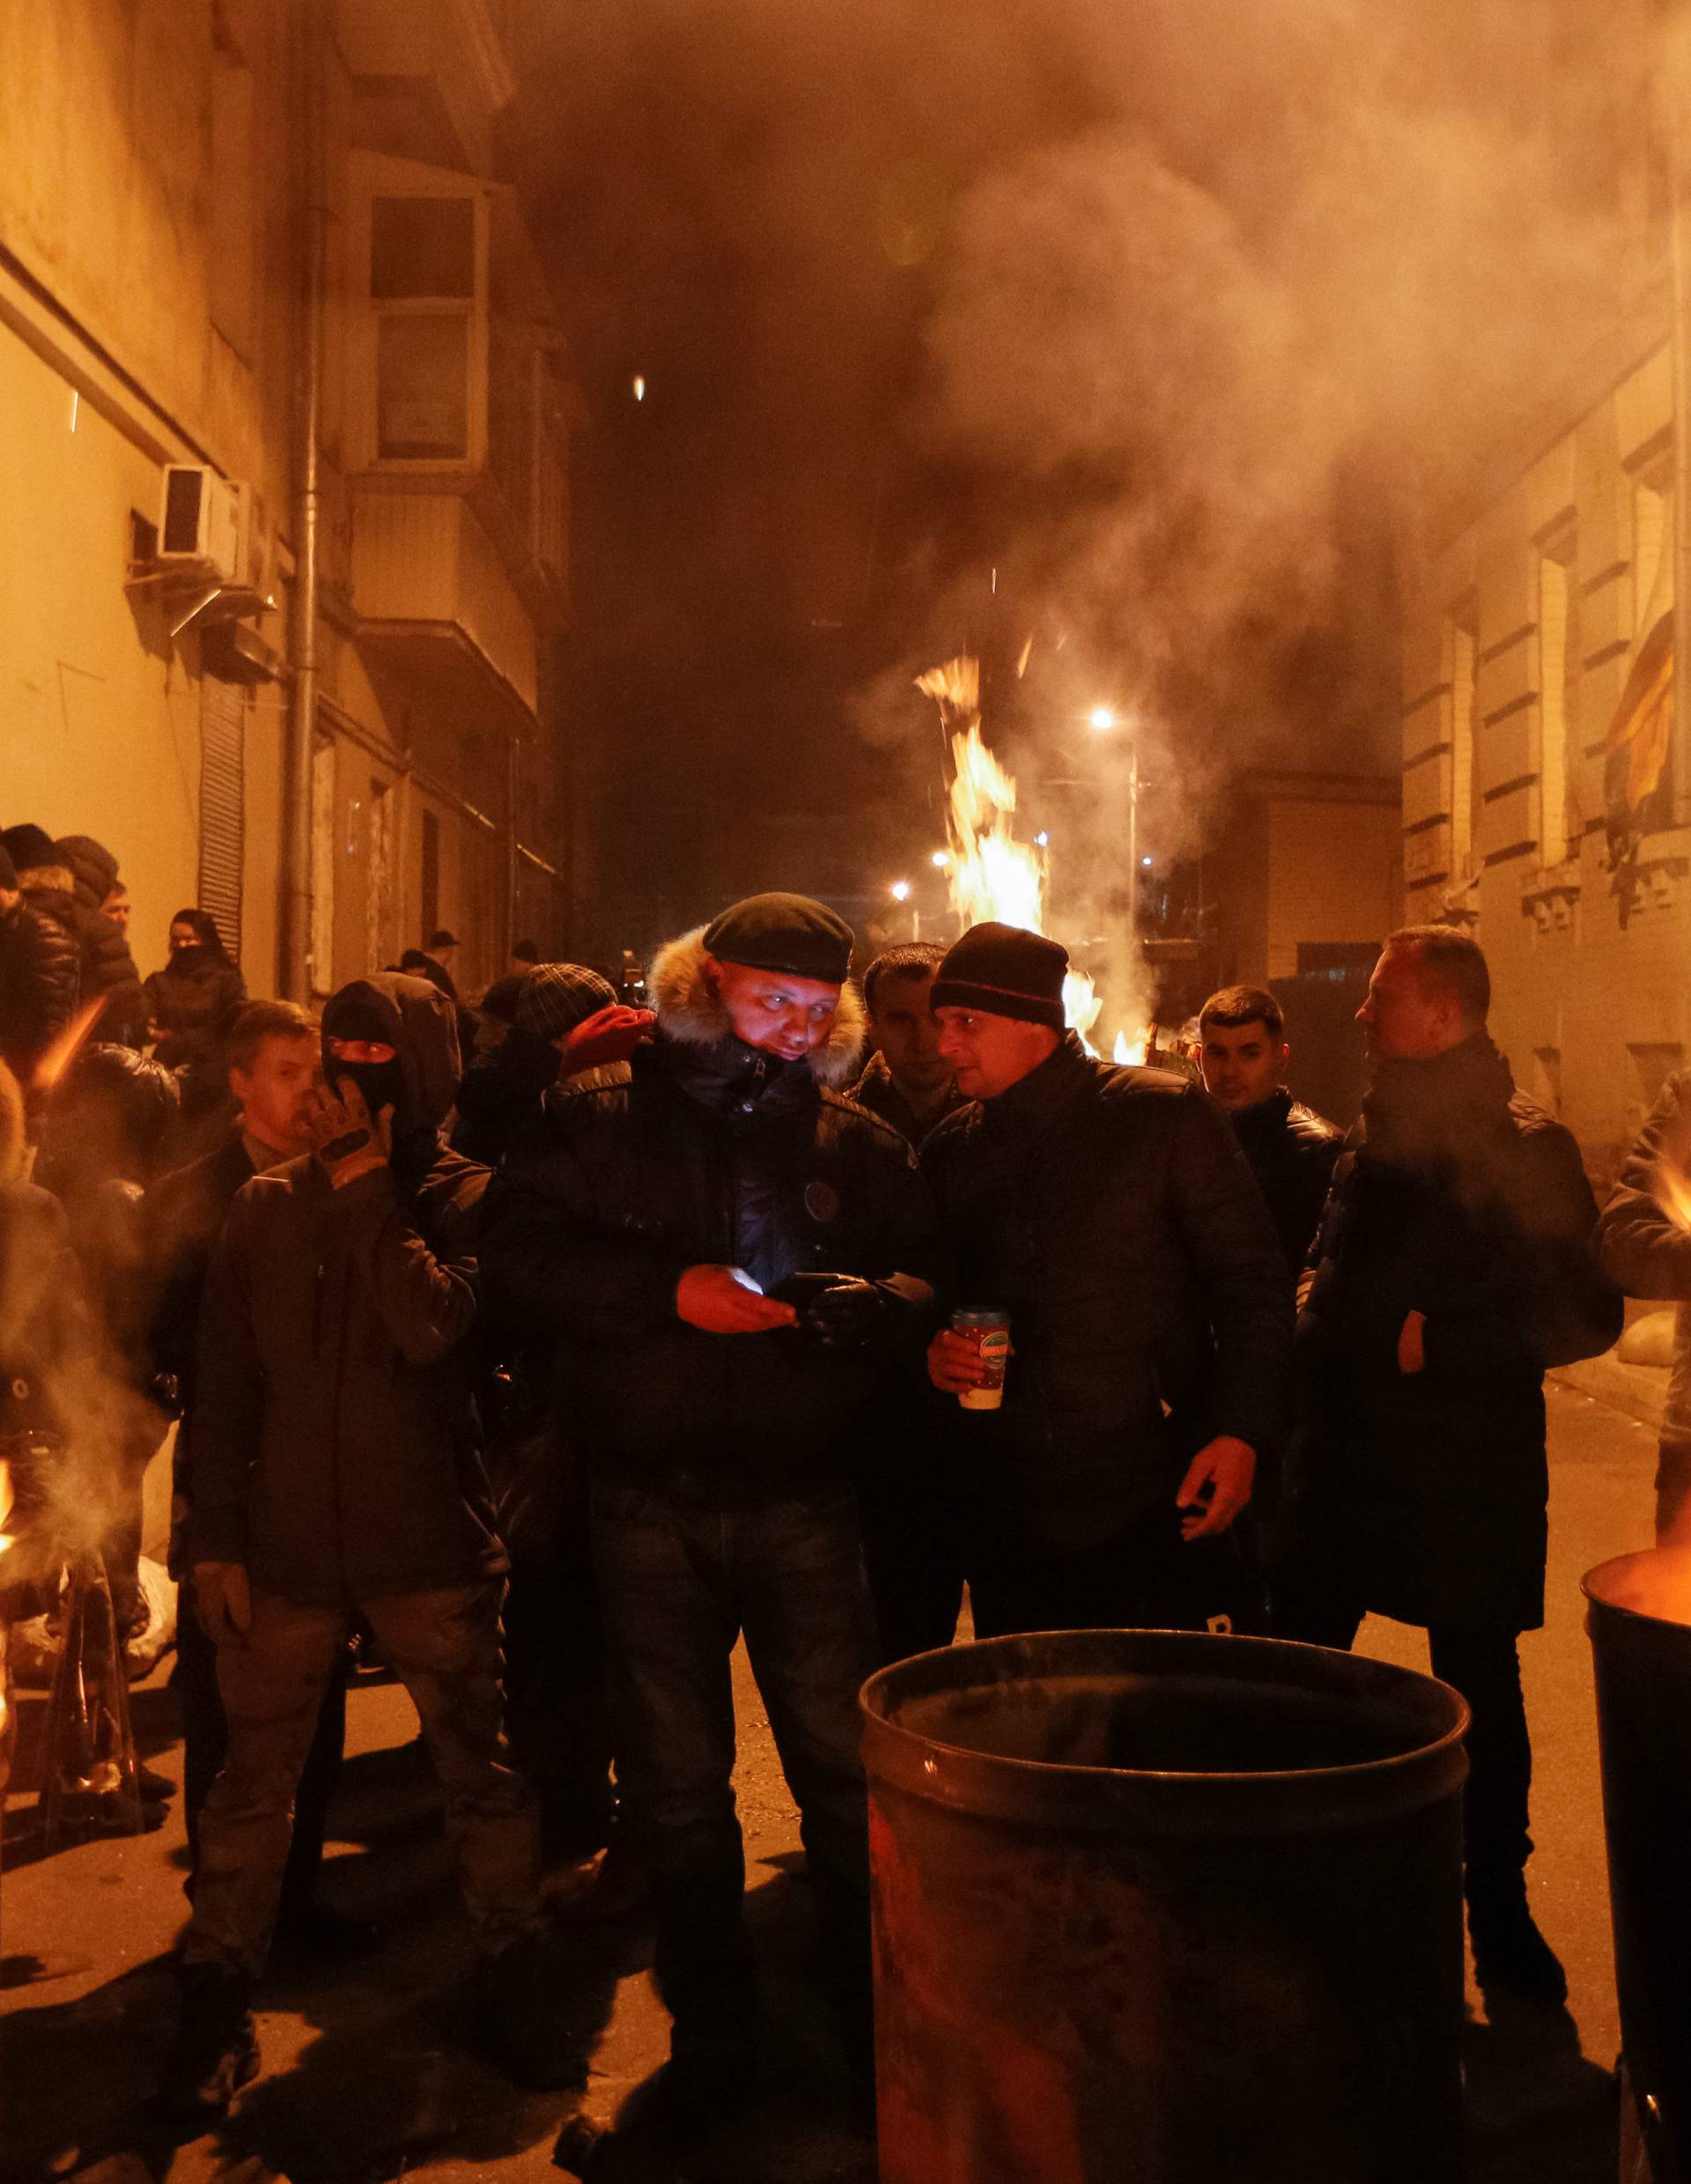 Supporters of former Georgian President Mikheil Saakashvili warm themselves at a bonfire near a temporary detention facility where Saakashvili was escorted after being detained in Kiev, Ukraine